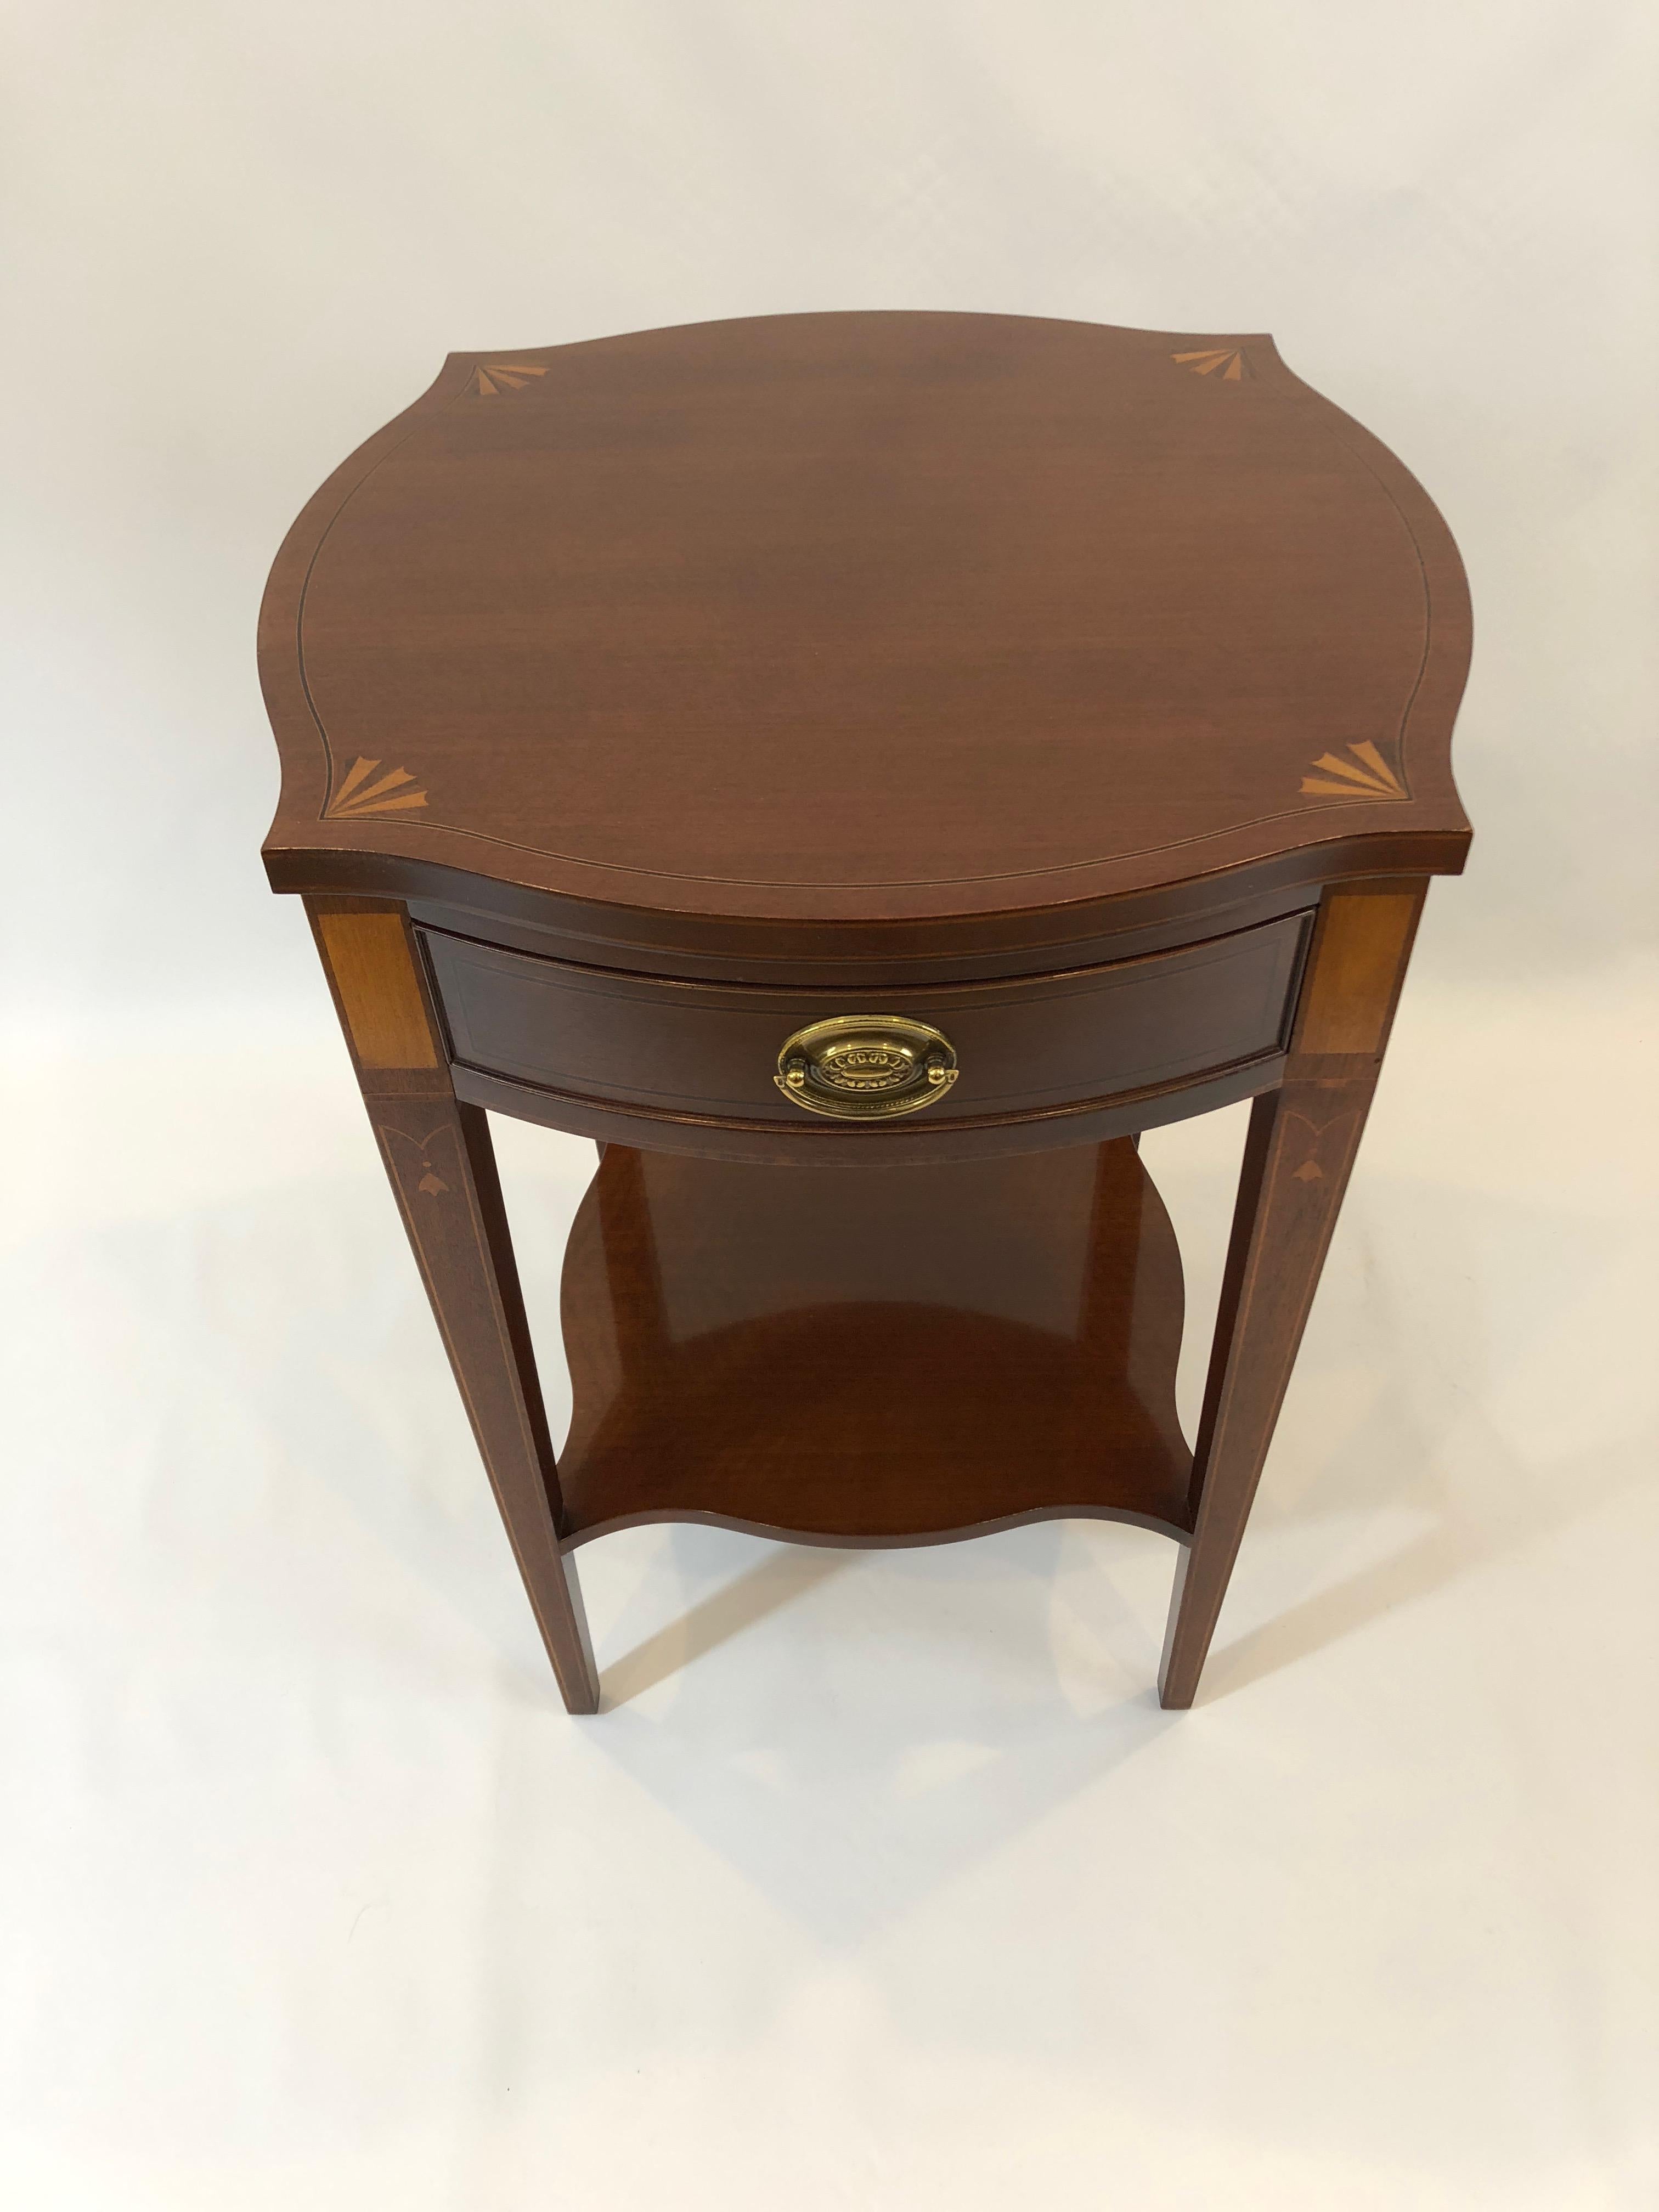 Refined mahogany side table by Baker from their Historic Charleston collection, having a square shape with pretty curvy shaped corners decorated with satinwood and ebony inlaid fans. There's a second tier, lovely tapered legs as well as original